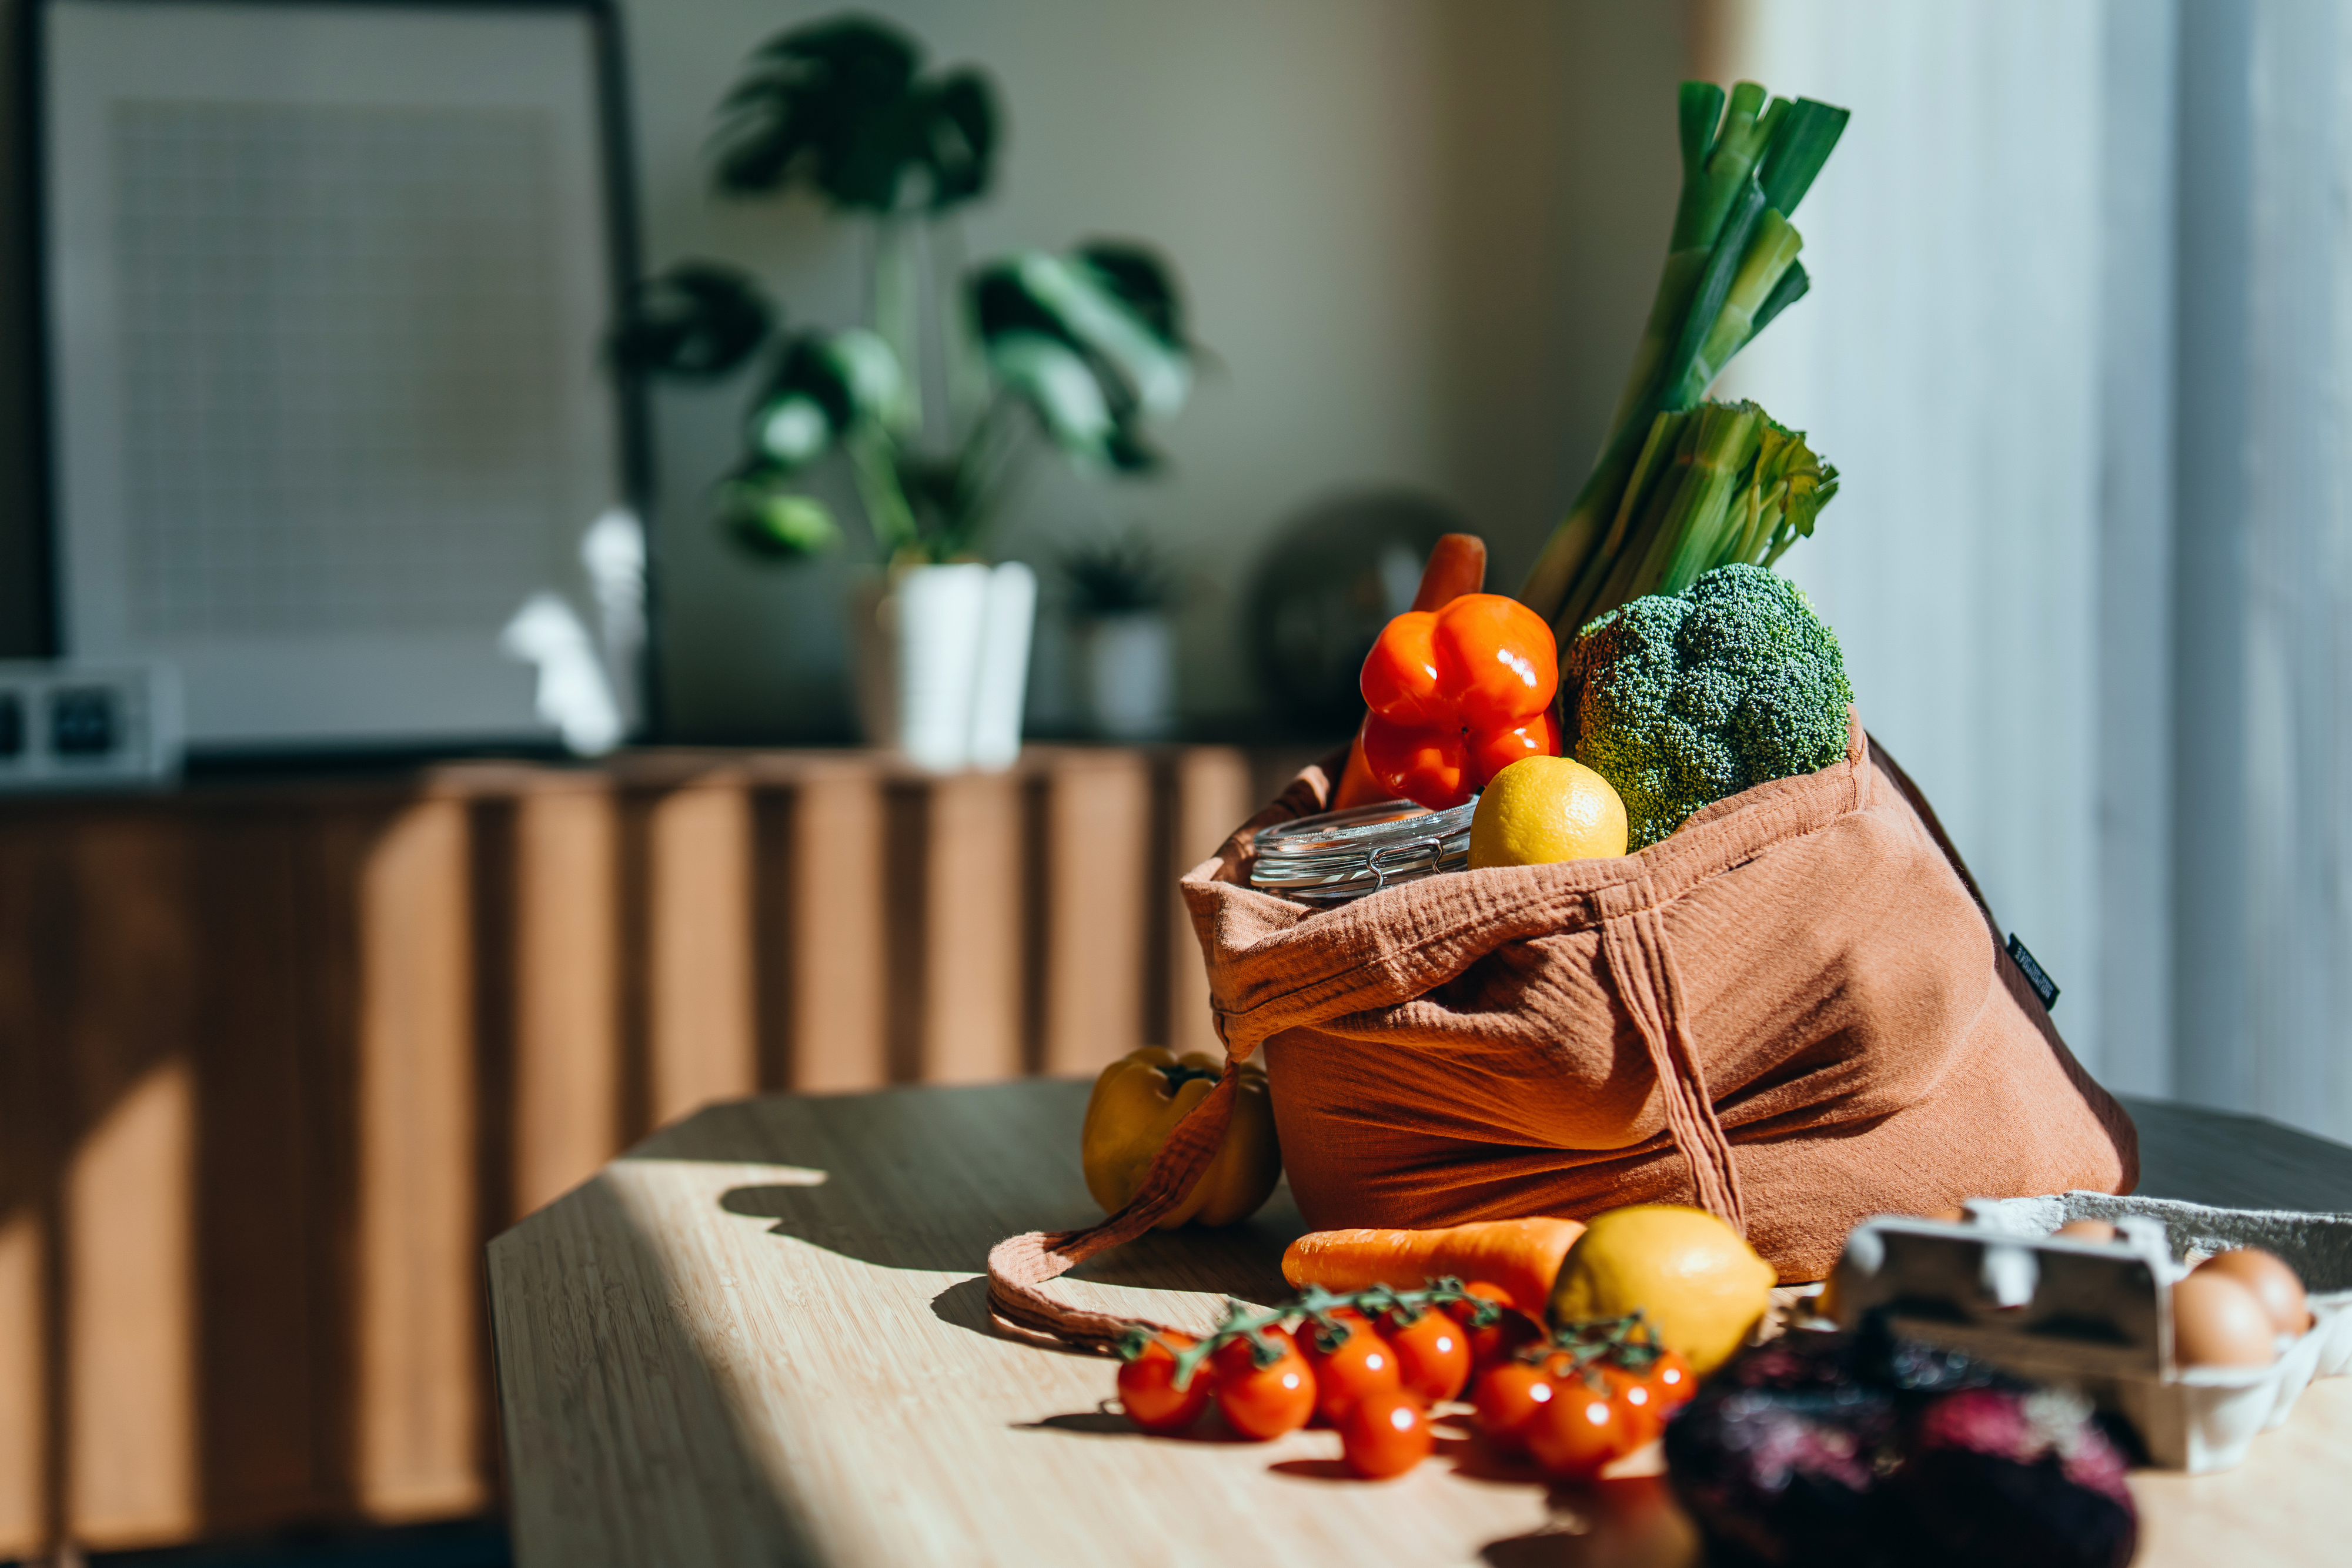 Groceries in a reusable bag on a table, suggesting preparation for a healthy home-cooked meal